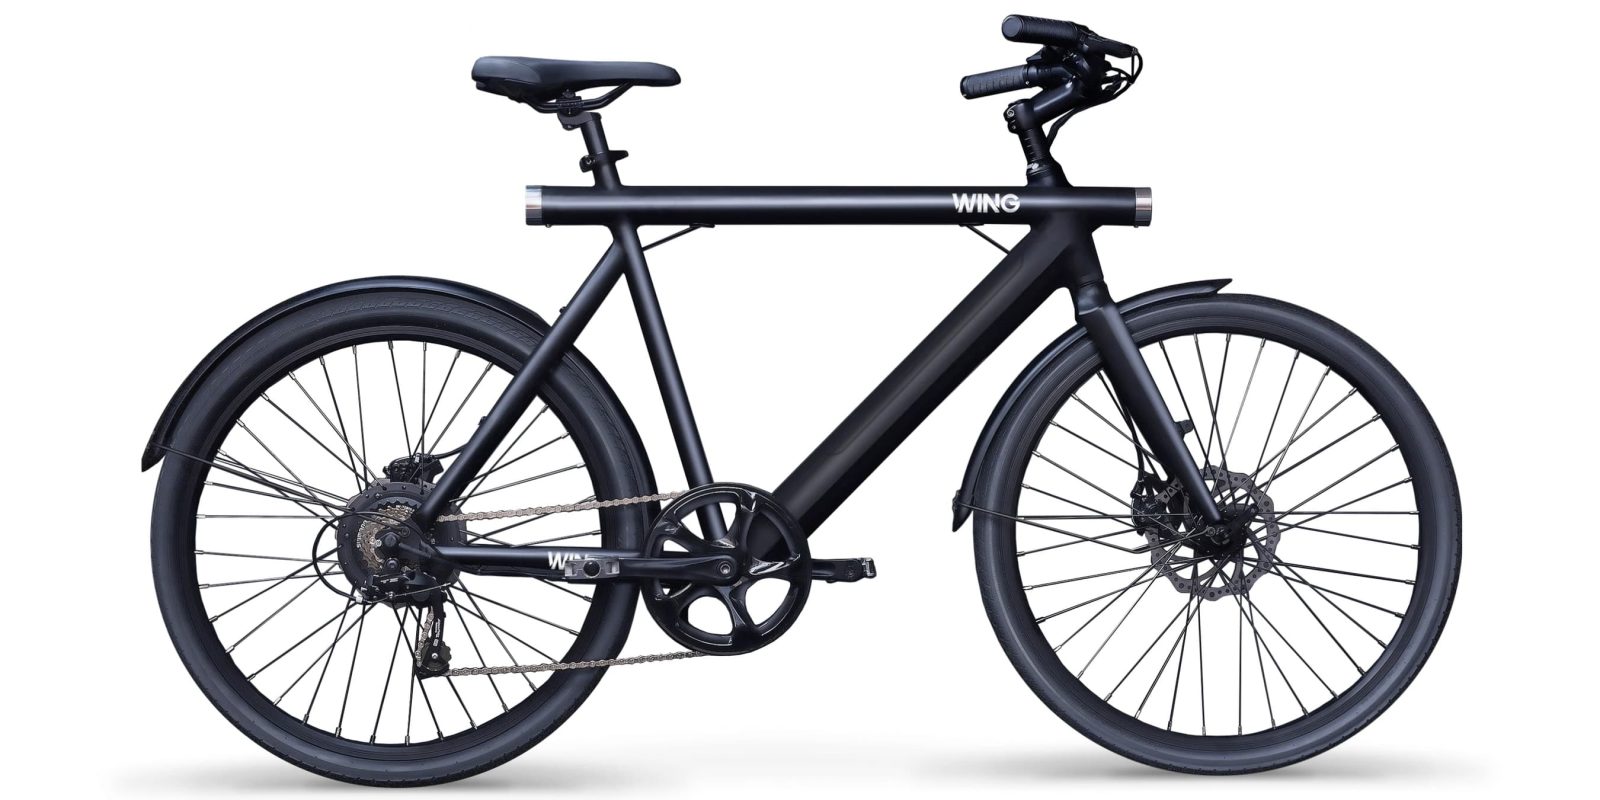 With electric bike theft on the rise, Wing Bikes is offering free location trackers on its e-bikesebikes and more